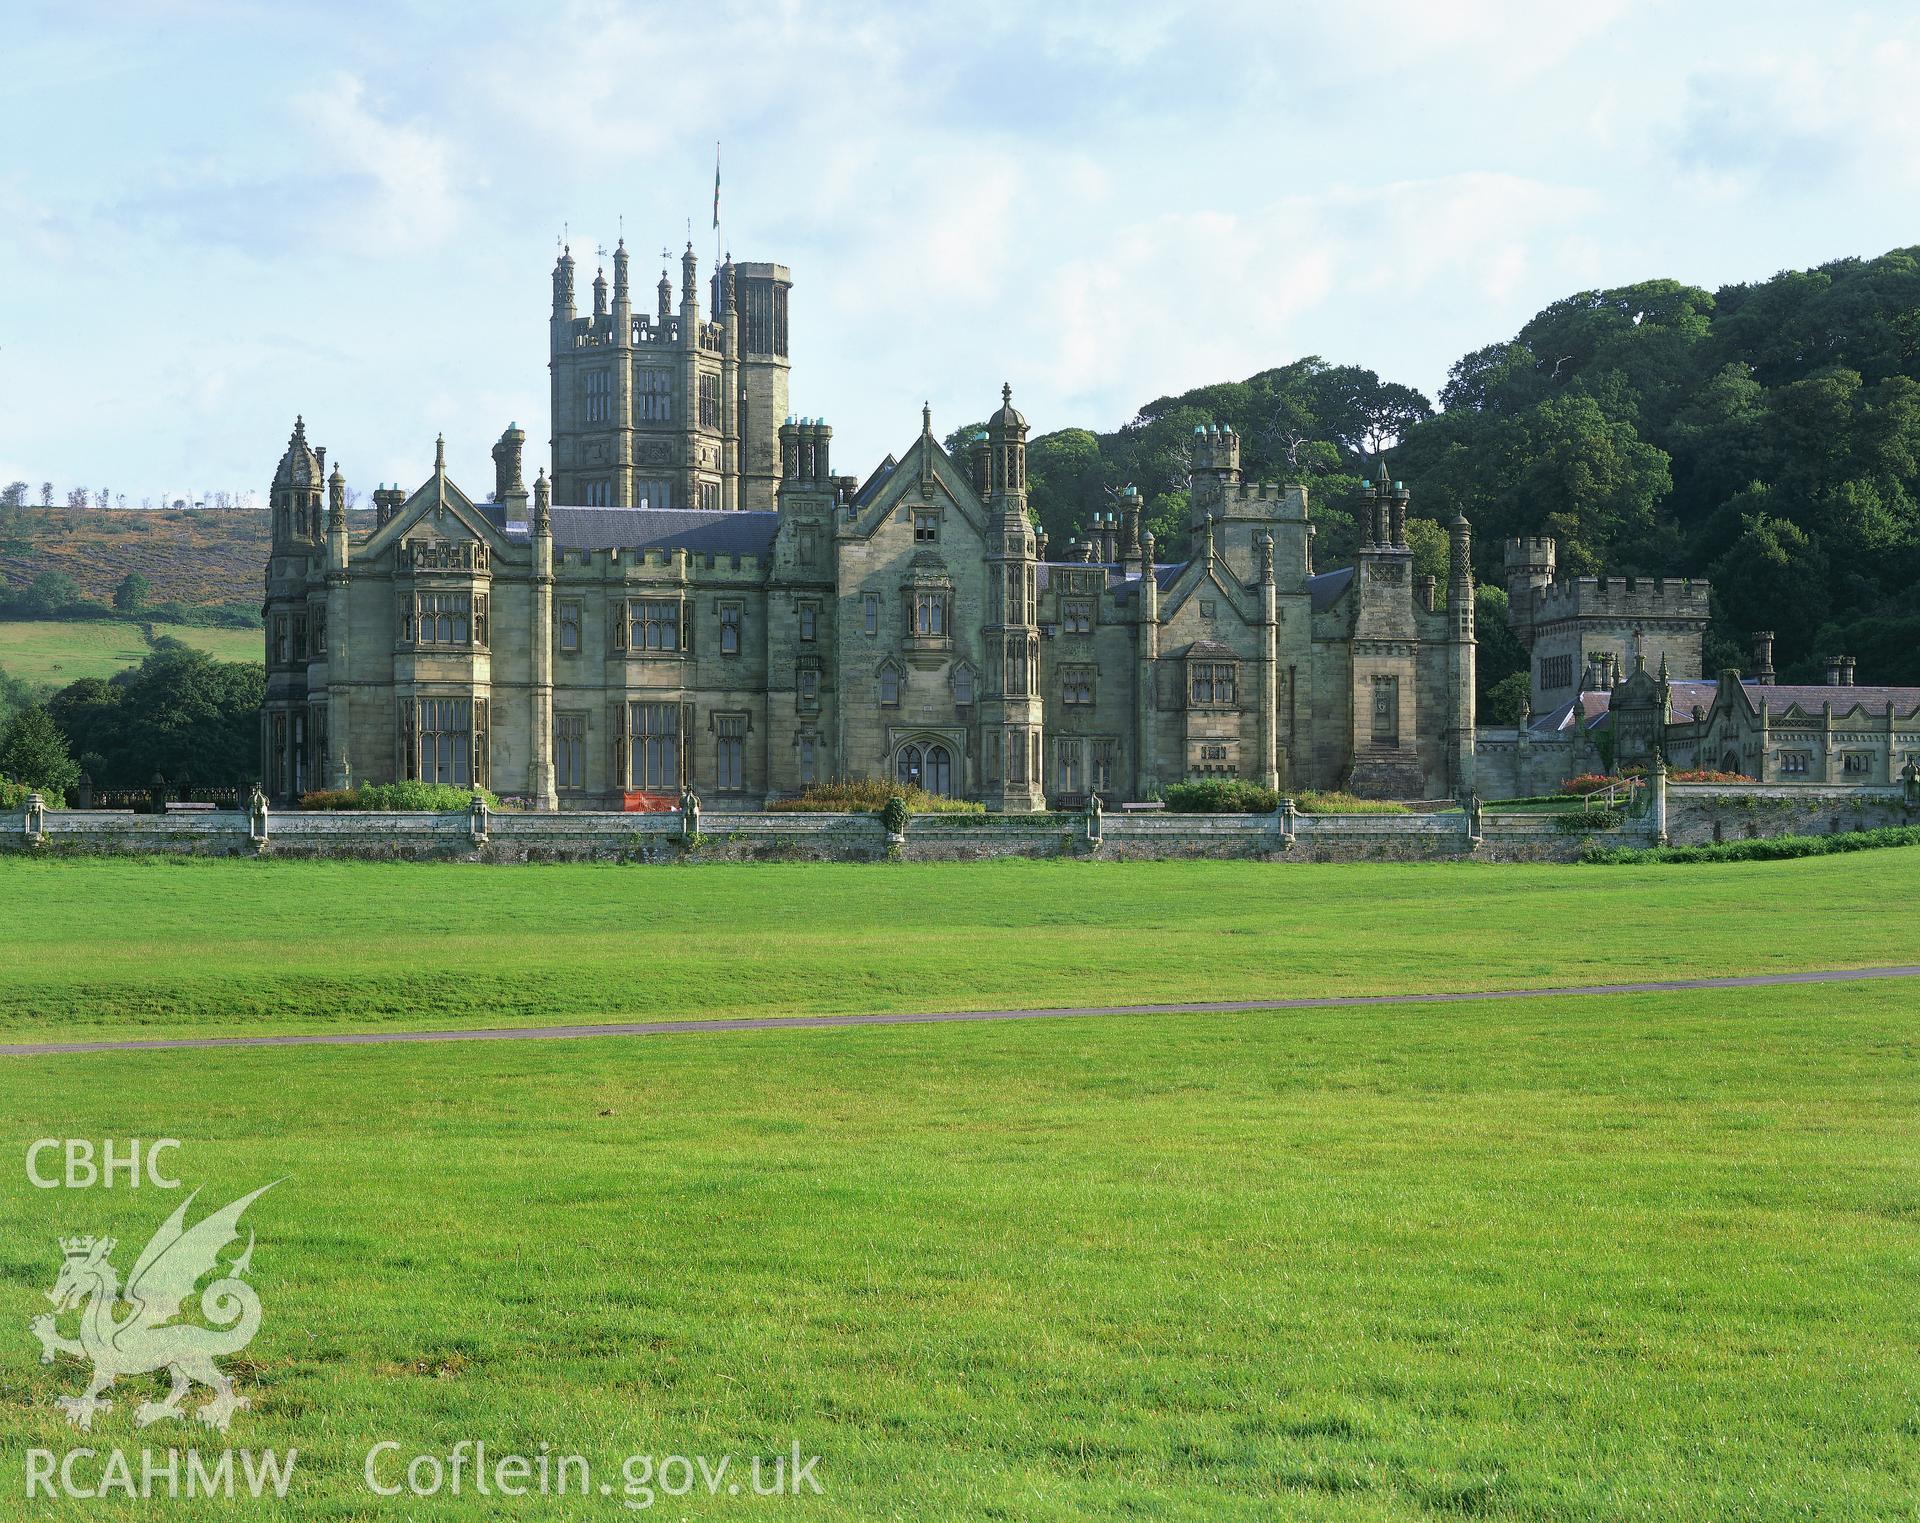 RCAHMW colour transparency showing exterior view of Margam Castle.